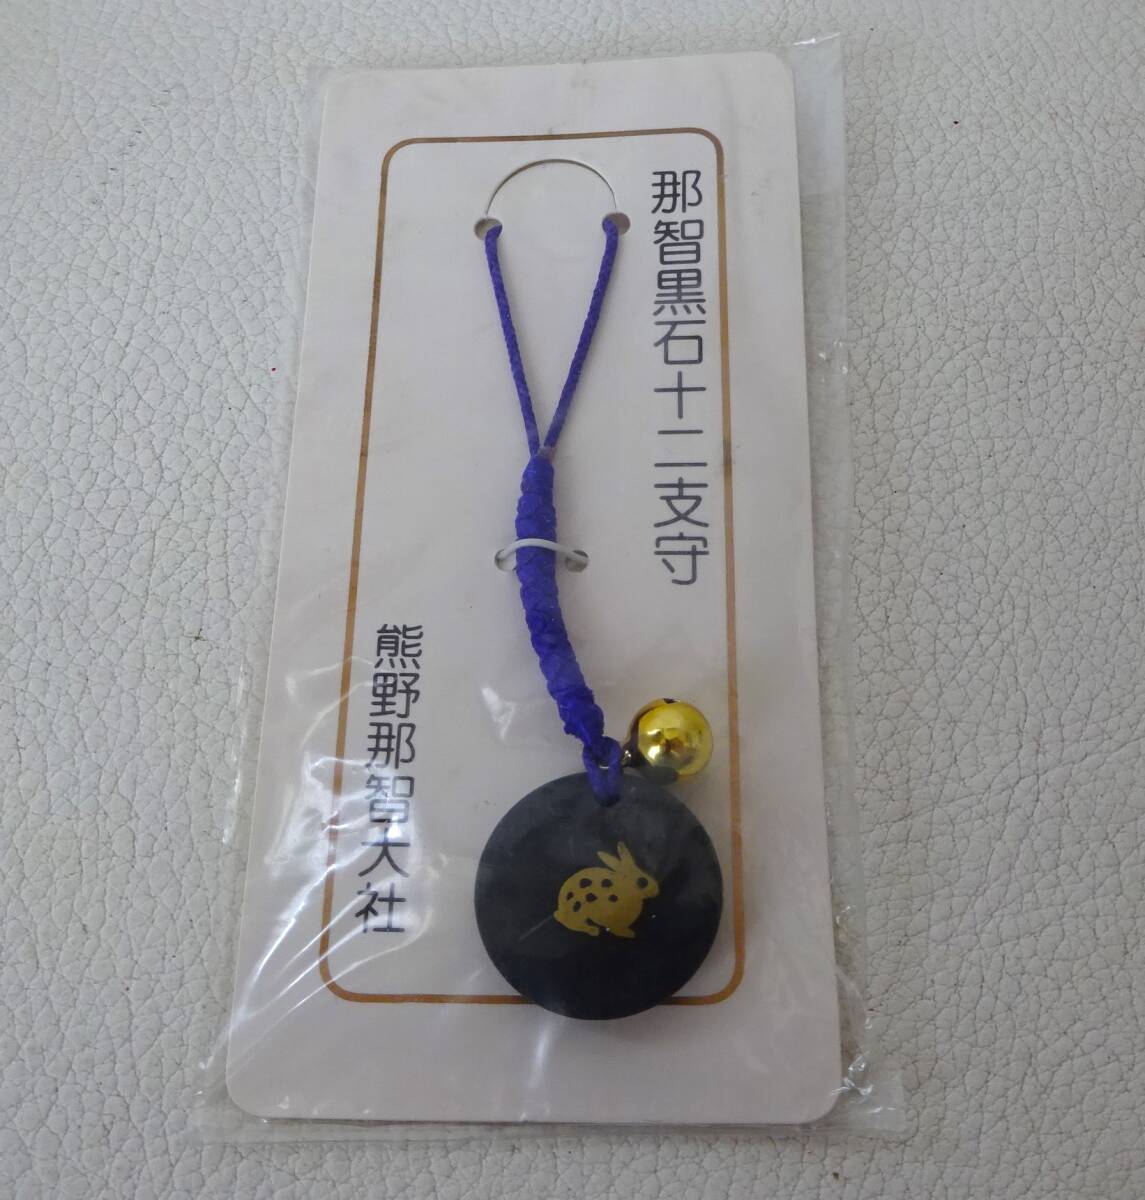  bear ... large company *.. black stone 10 two main .[. year ...* amulet netsuke strap ]... except .. except . woe defect .. traffic safety * unused * unopened * home storage 